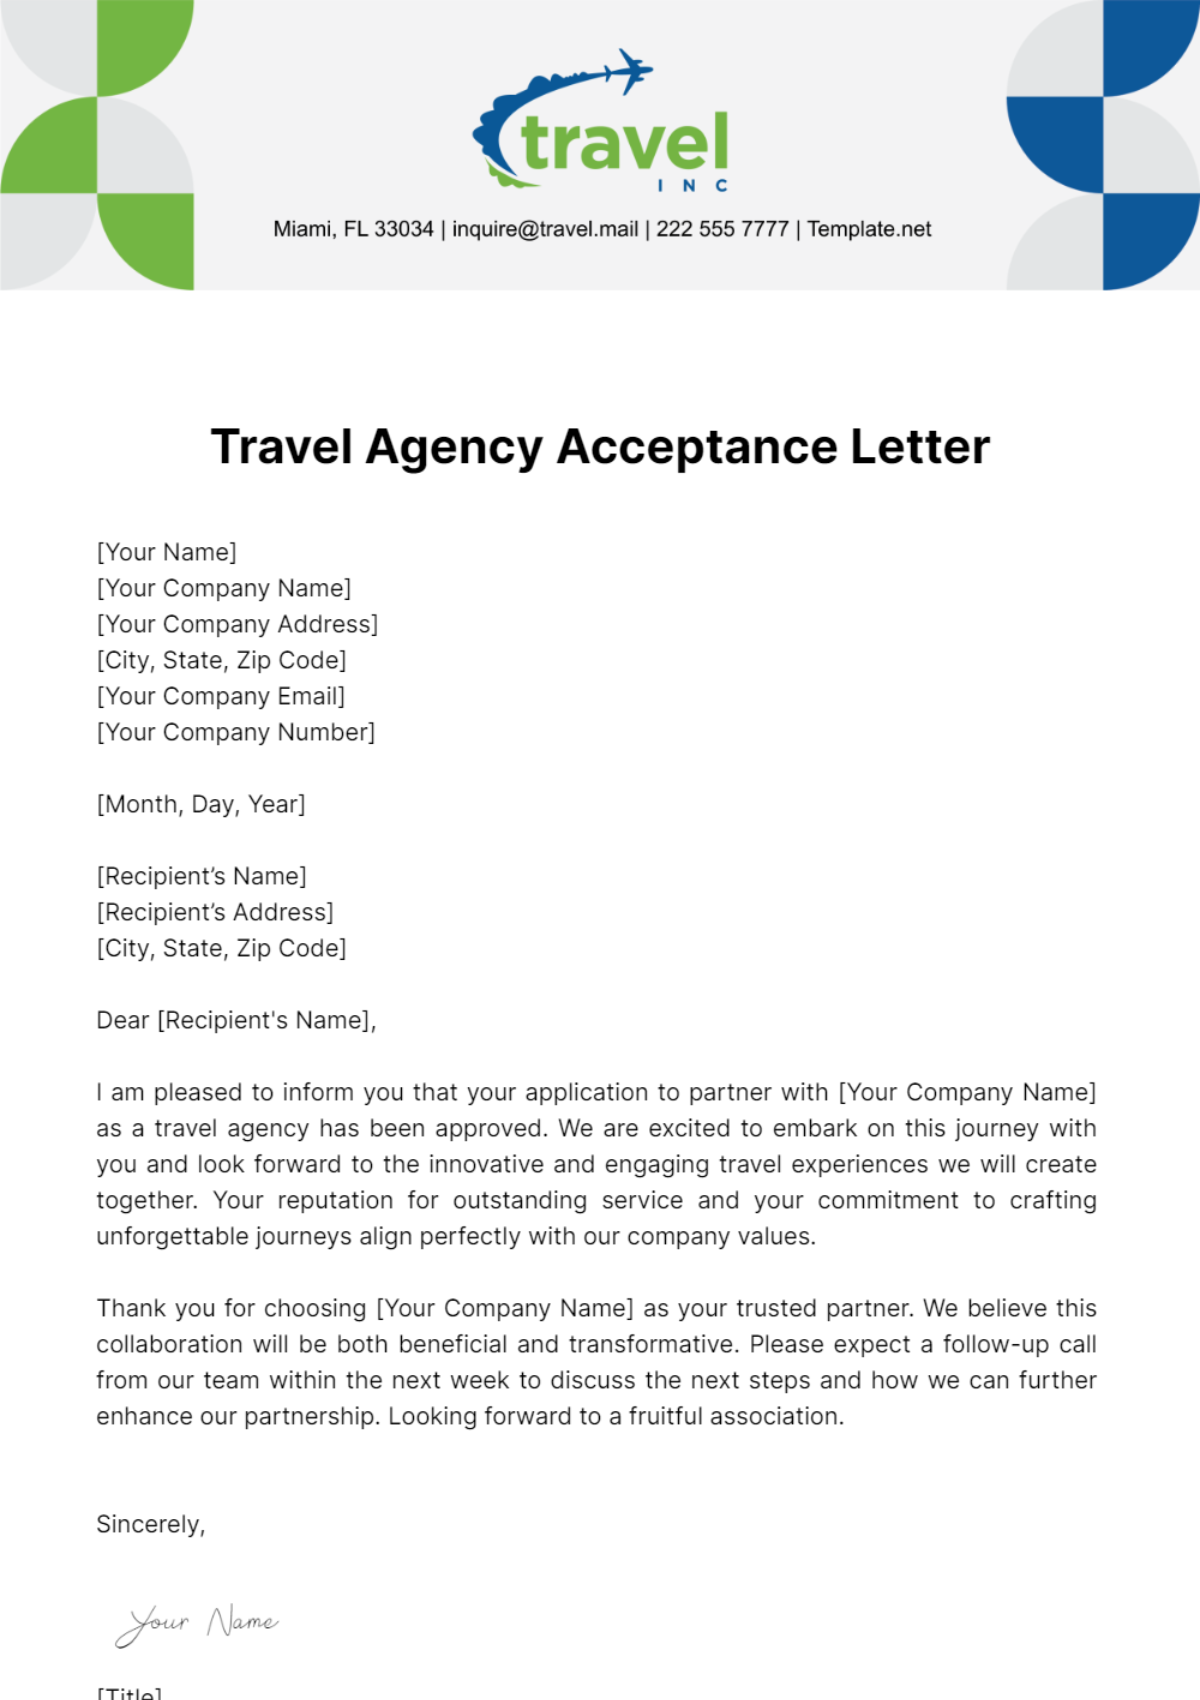 Travel Agency Acceptance Letter Template